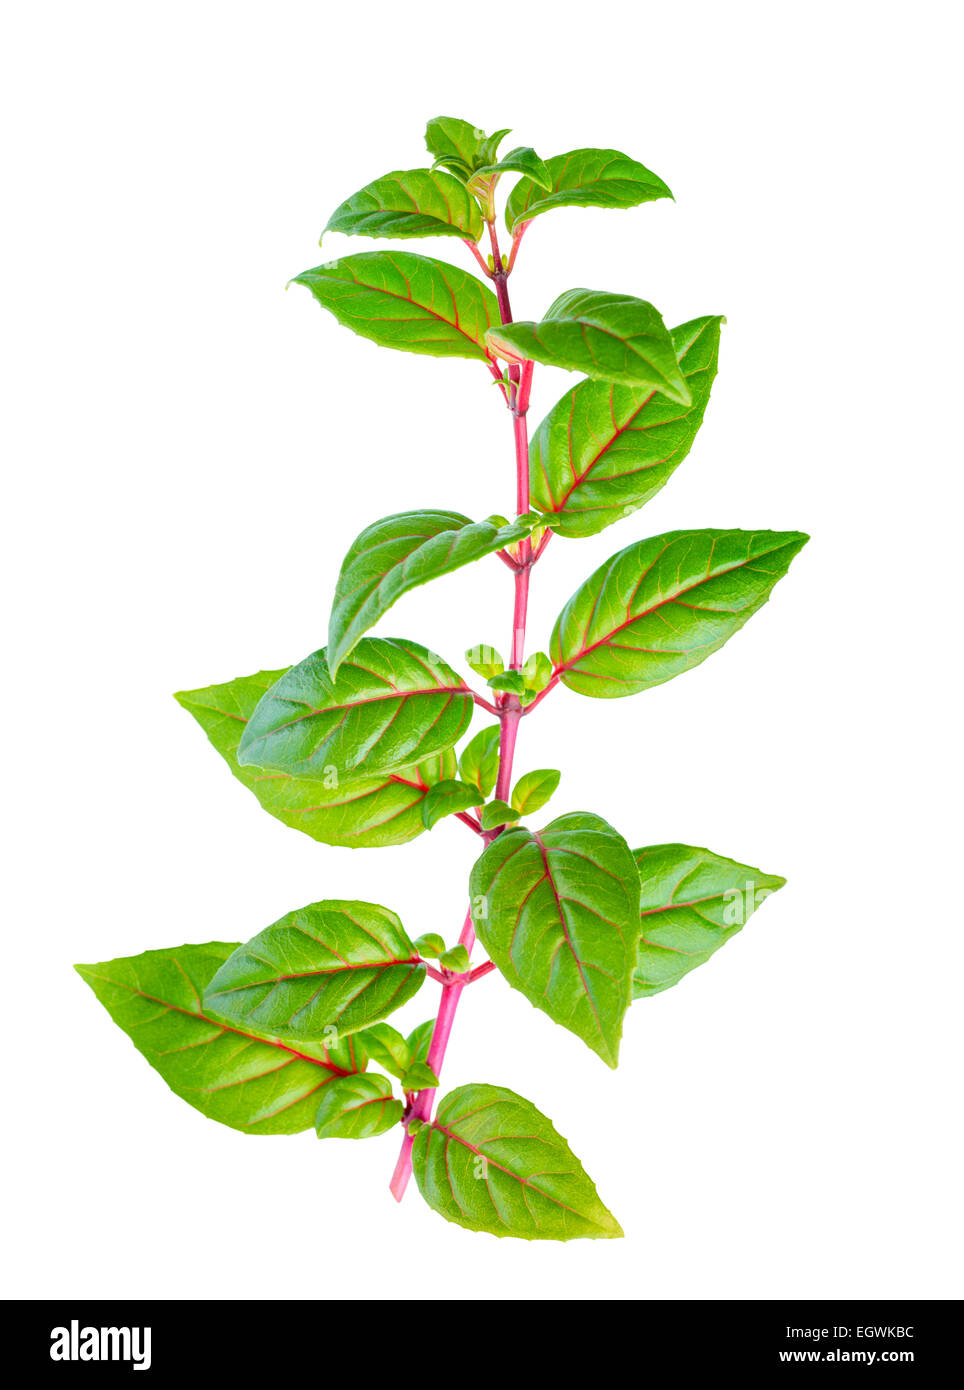 green branch of fuchsia with red veins is isolated on white background Stock Photo